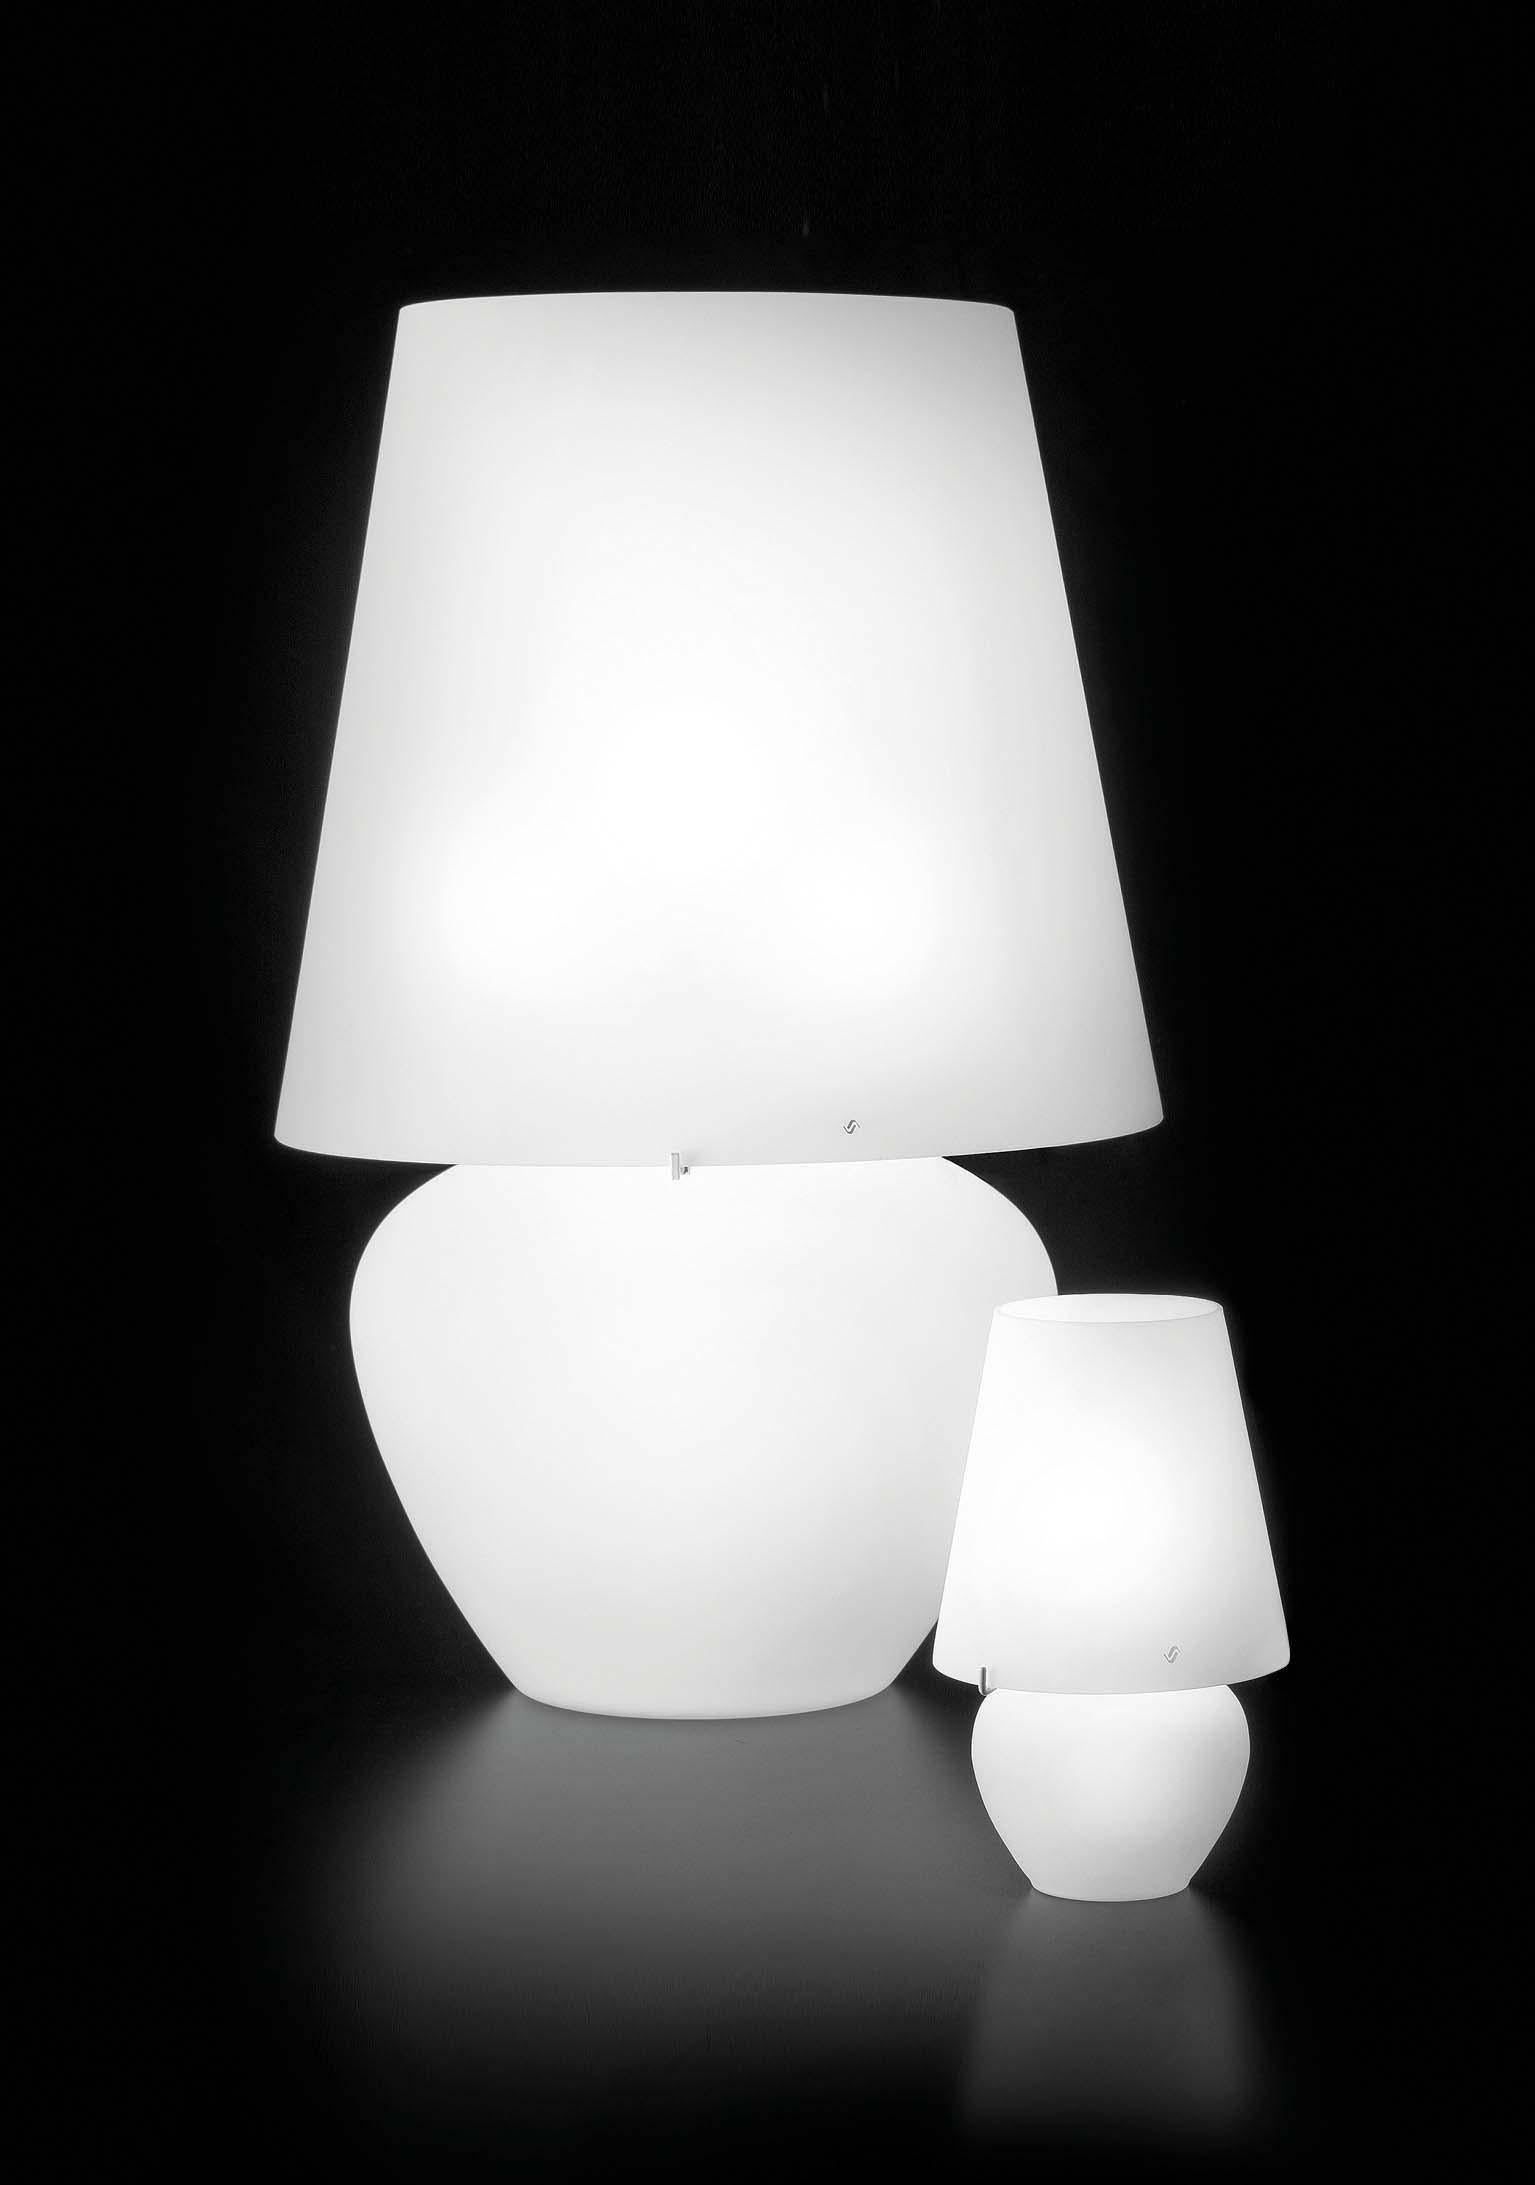 A collection of table lamps, pendants and floor lamps with a recognizable design that maximizes the quality of the matt-finish glass. 

Specifications: 
Light source: E12
No of bulbs: 1×40W E12 + 1×25W E12
Dimmer: DIM 4
Frame finish: Glossy